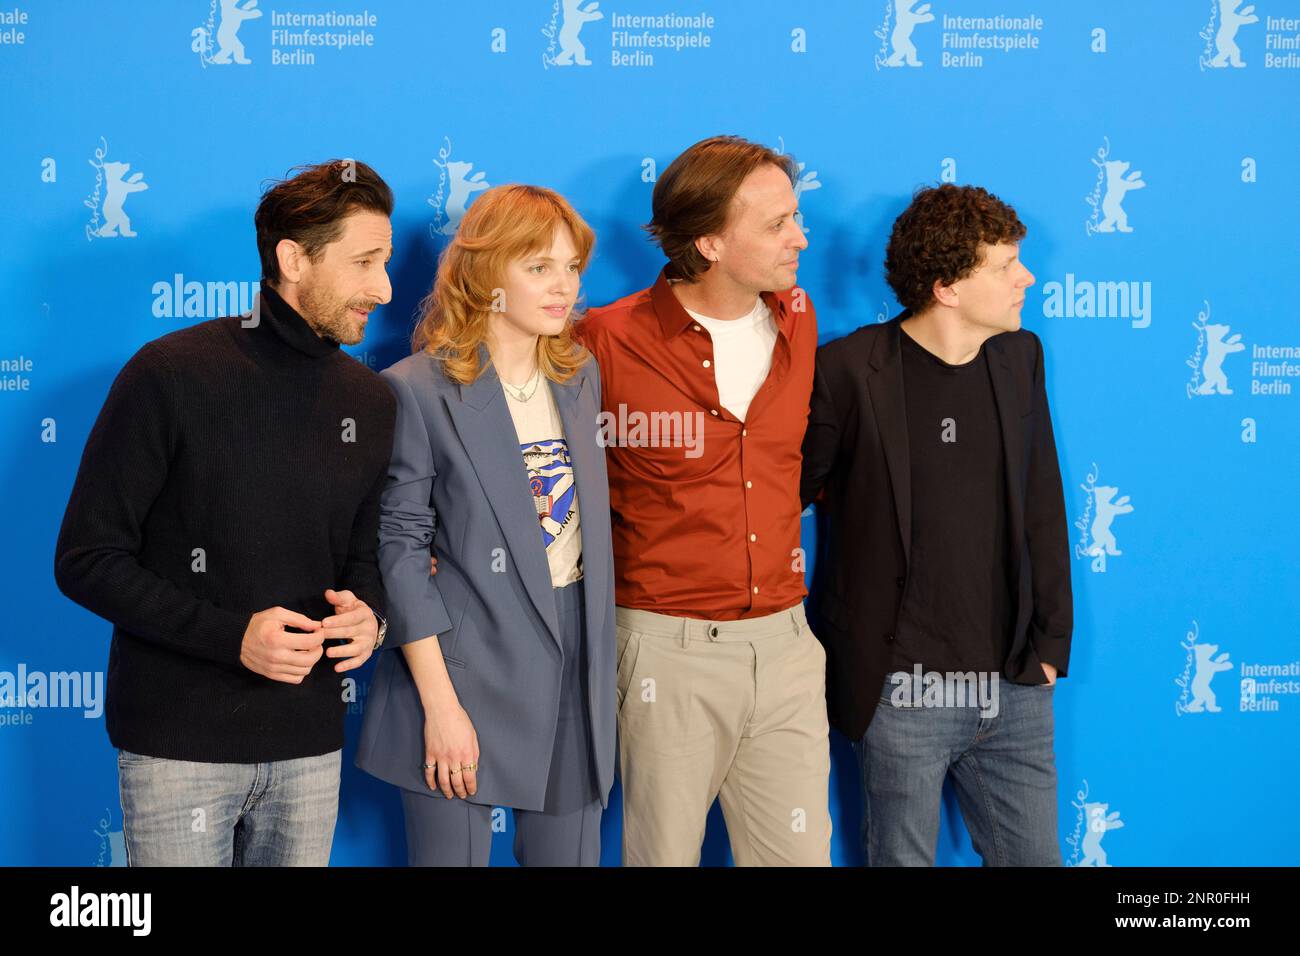 (L to R) Sierra Leone born actor Sallieu Sesay, US actor Adrien Brody, Australian actress Odessa Young, South African director John Trengove, US actor Stock Photo